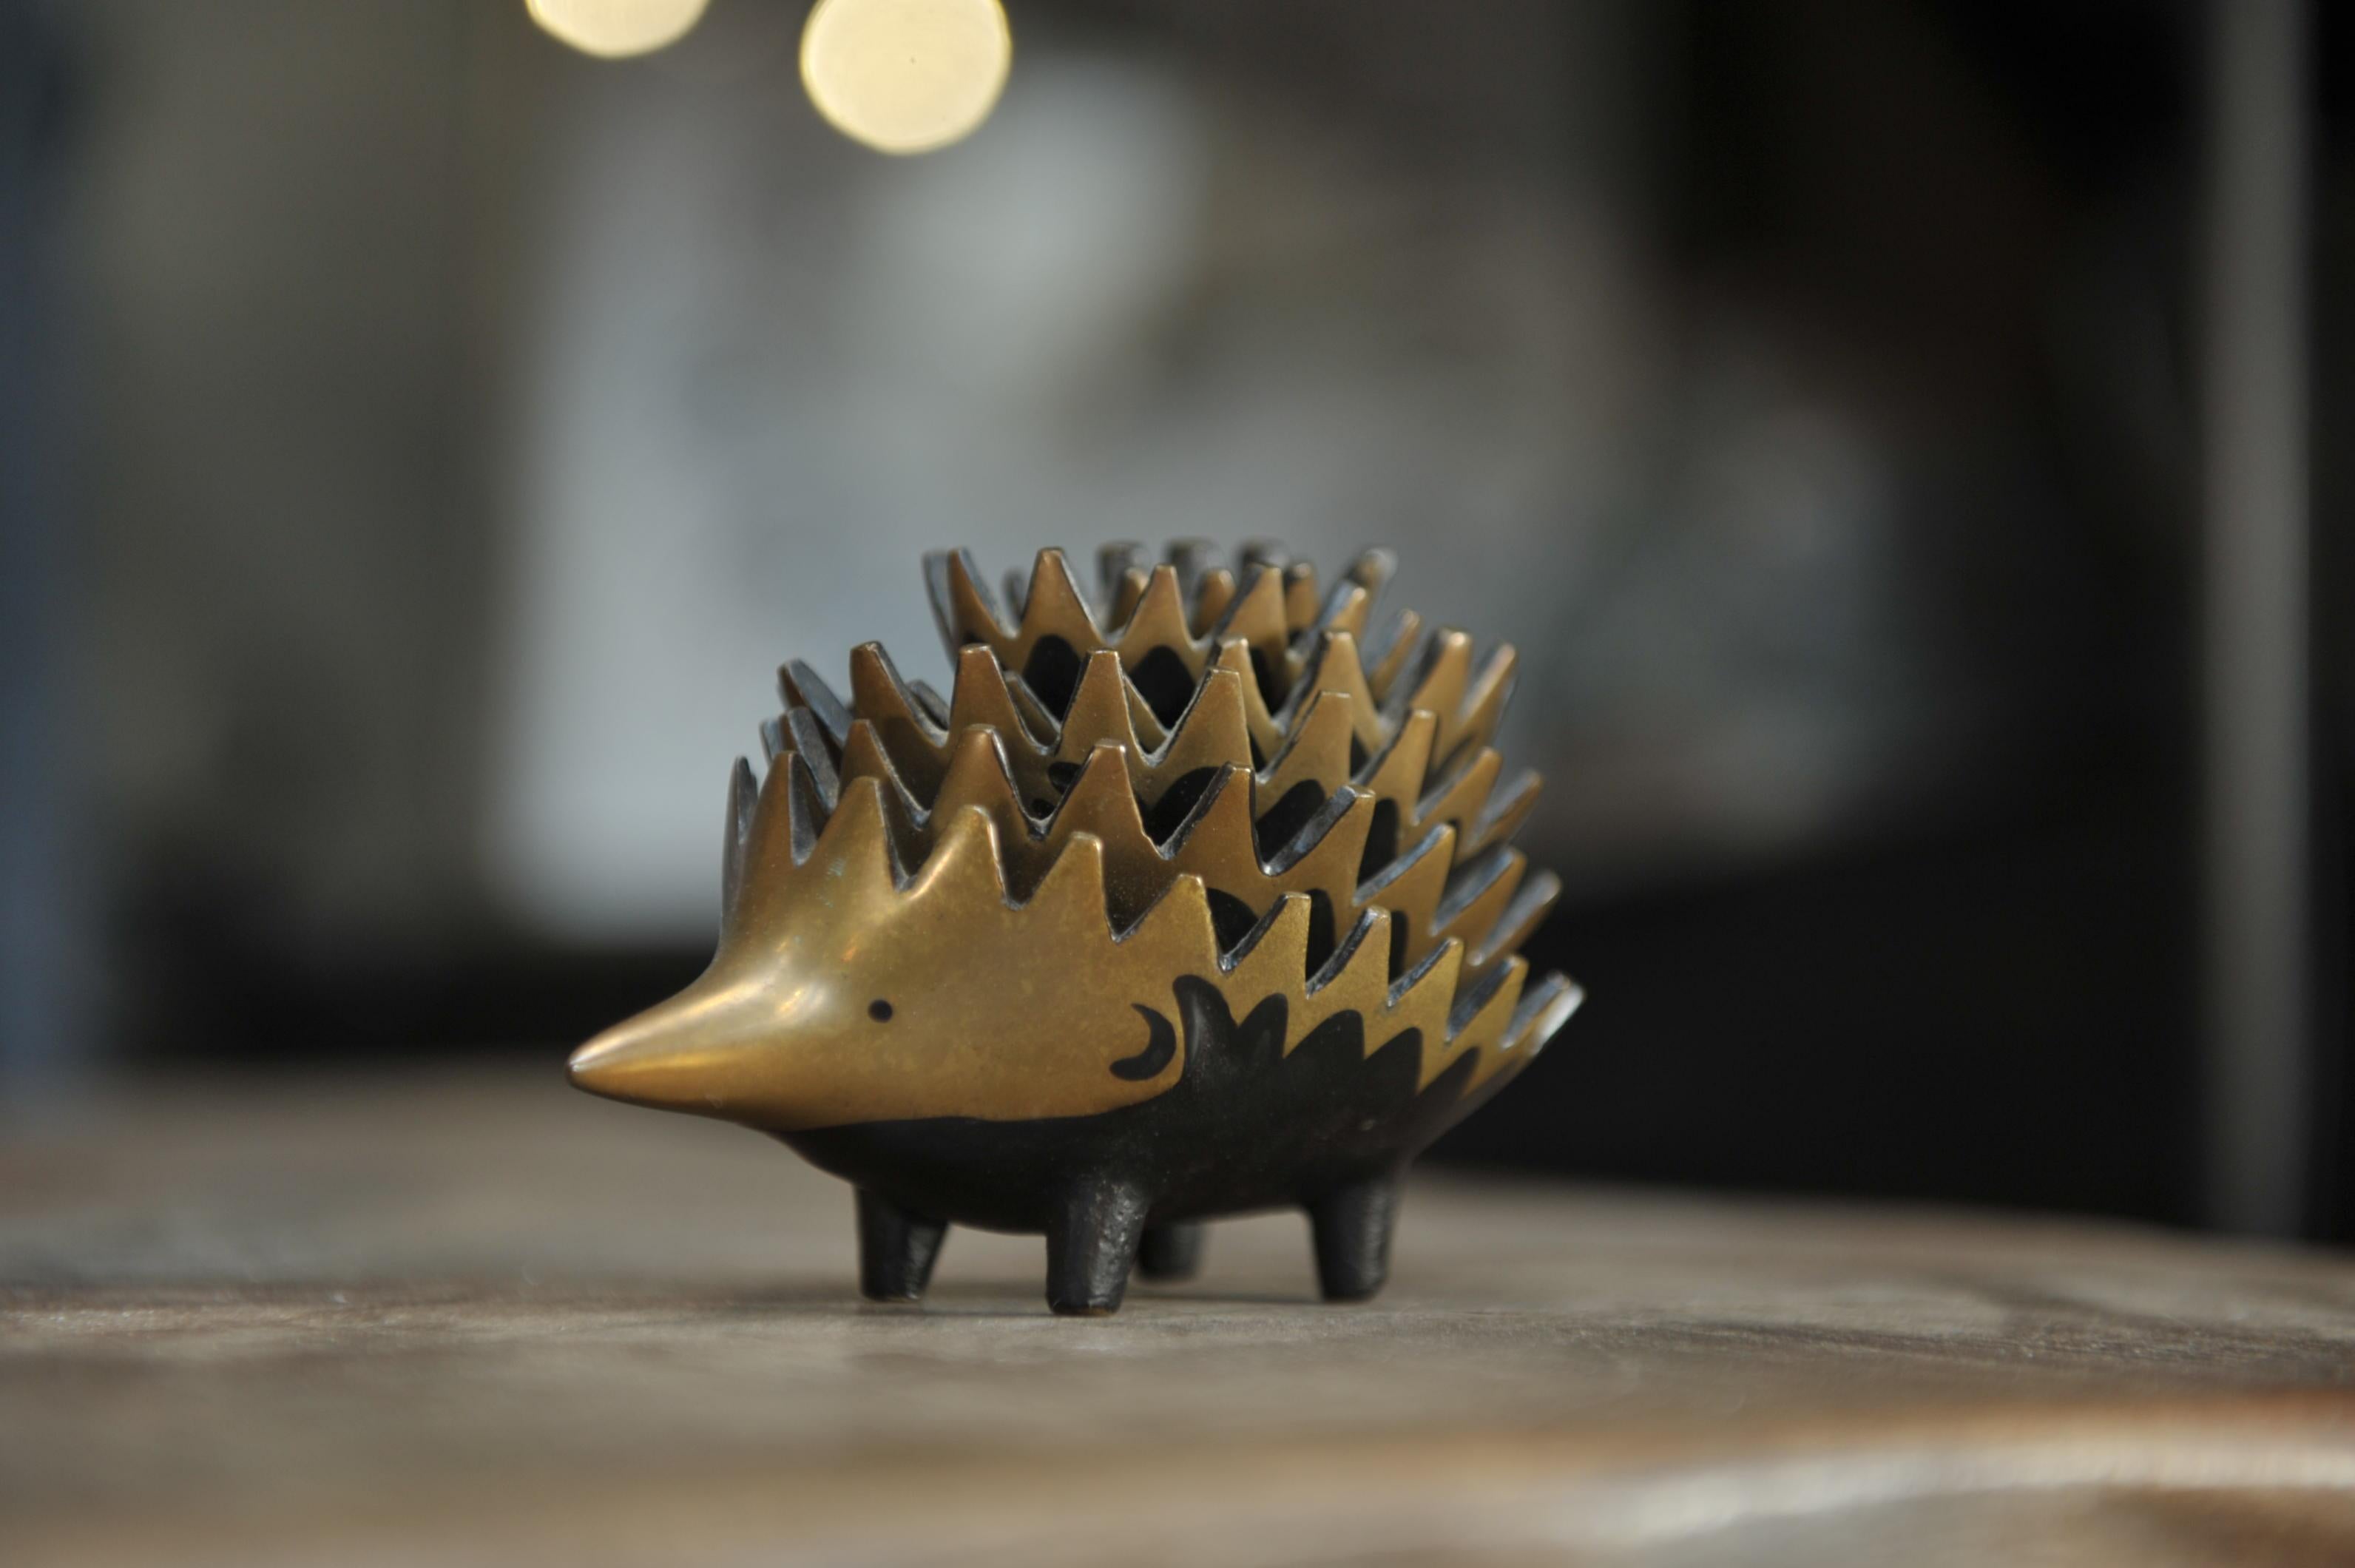 Set of Hedgehog family 6 pieces bronze ashtray by Walter Bosse for Hertha Baller circa 1950.